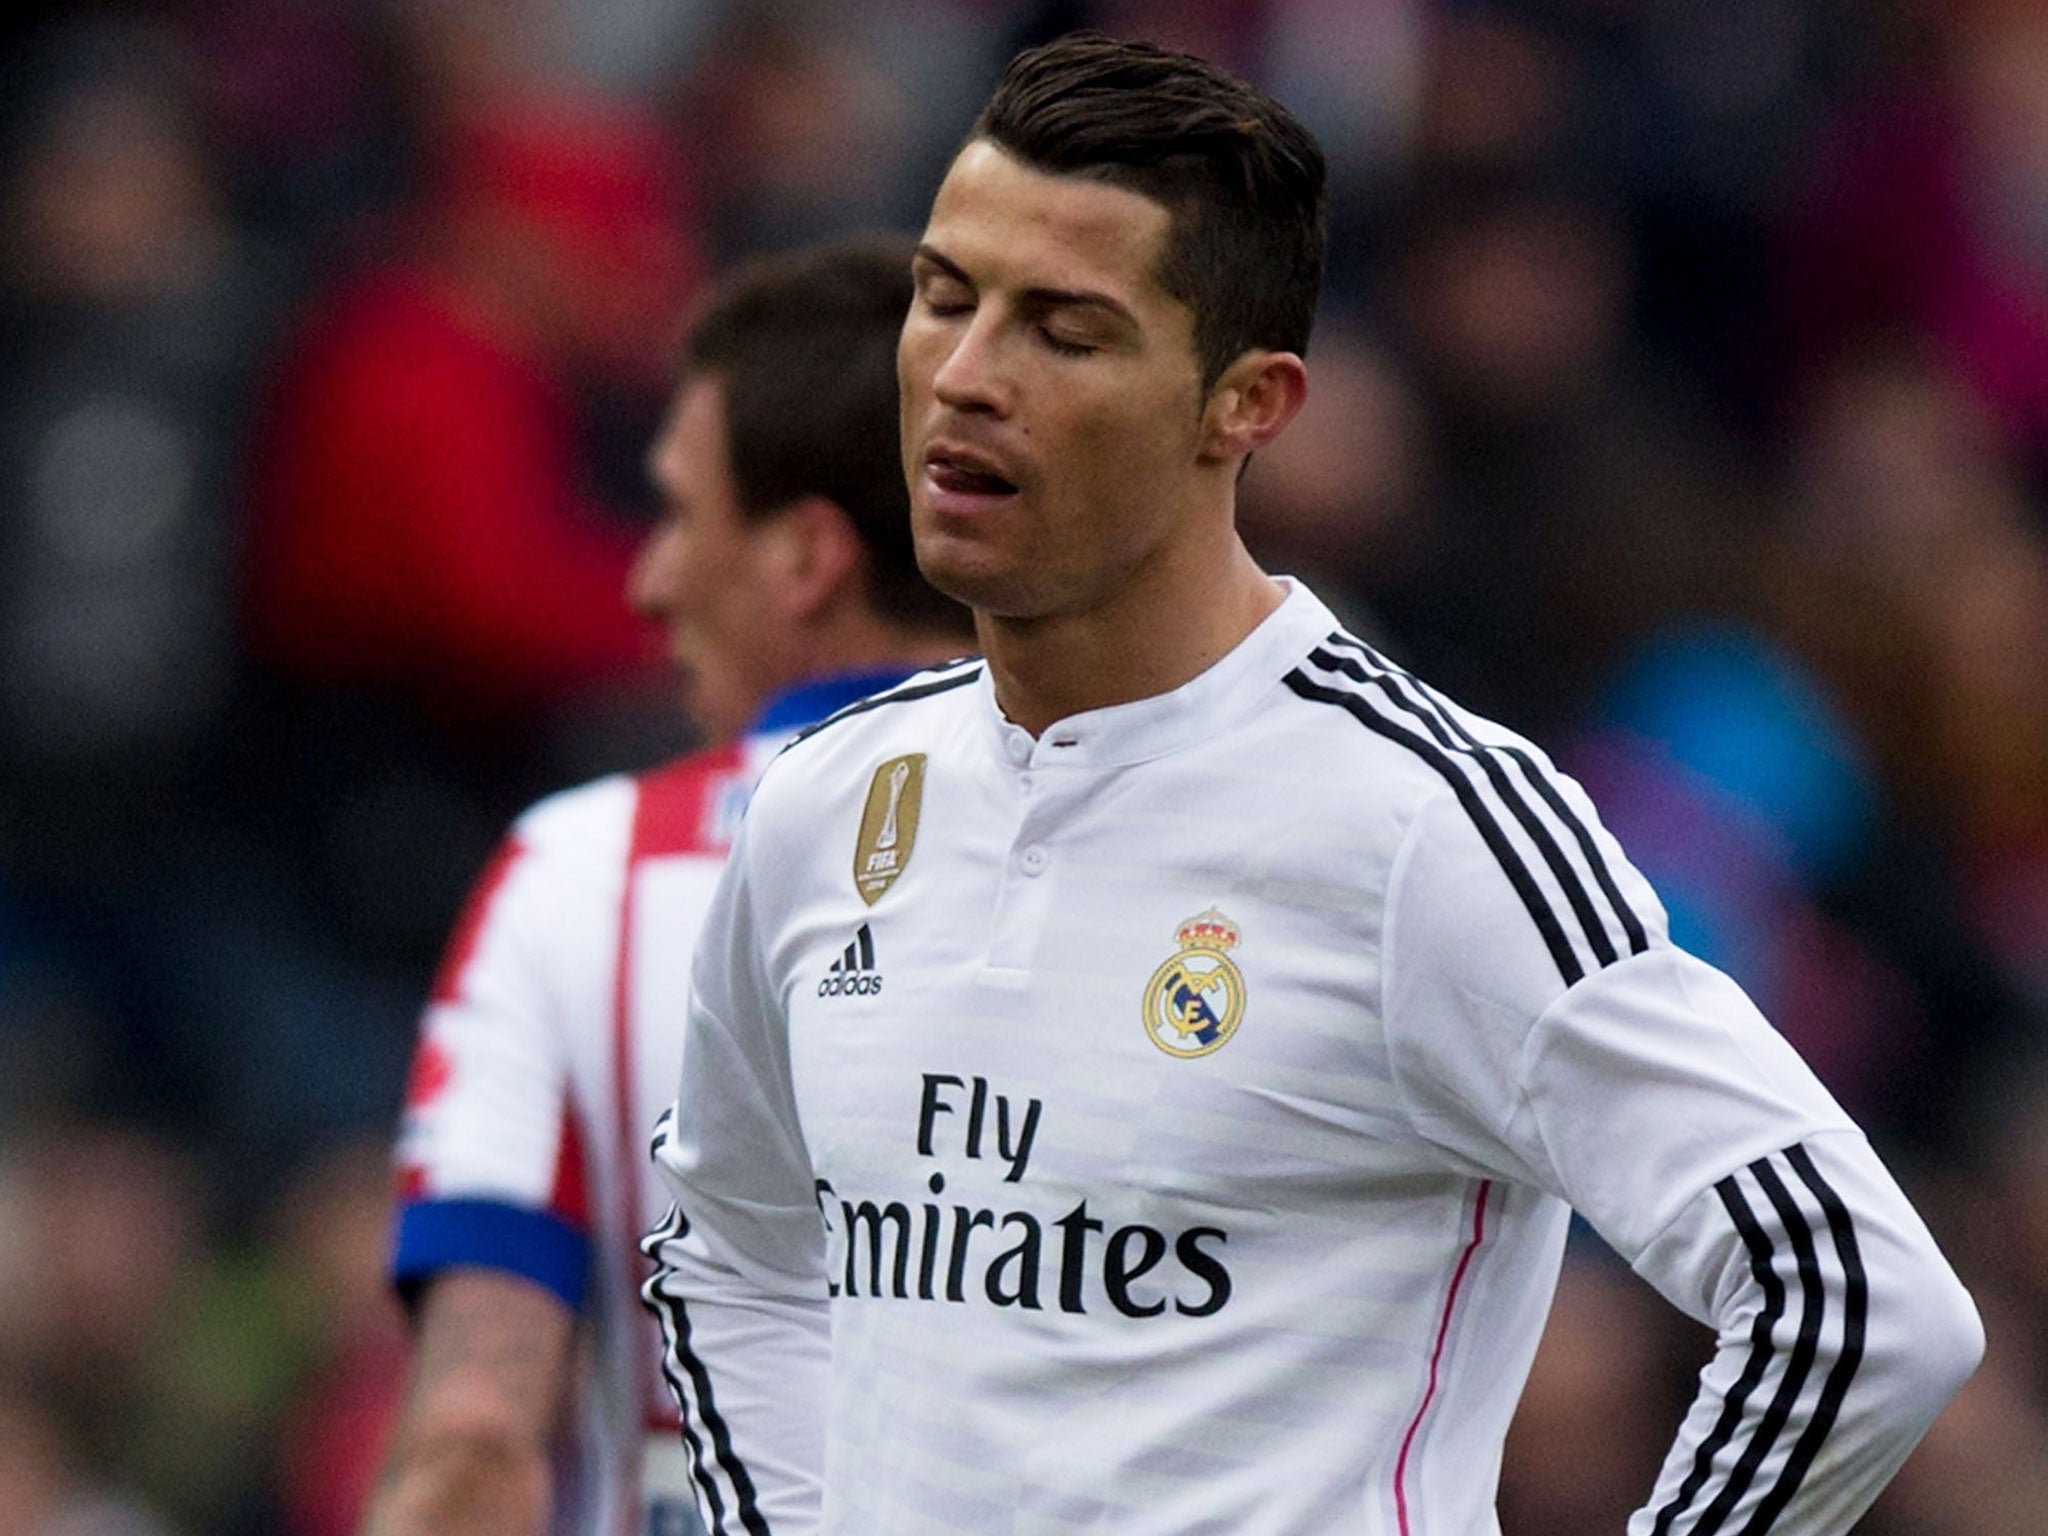 A distraught Cristiano Ronaldo pictured after Real Madrid lost 4-0 to Atletico Madrid